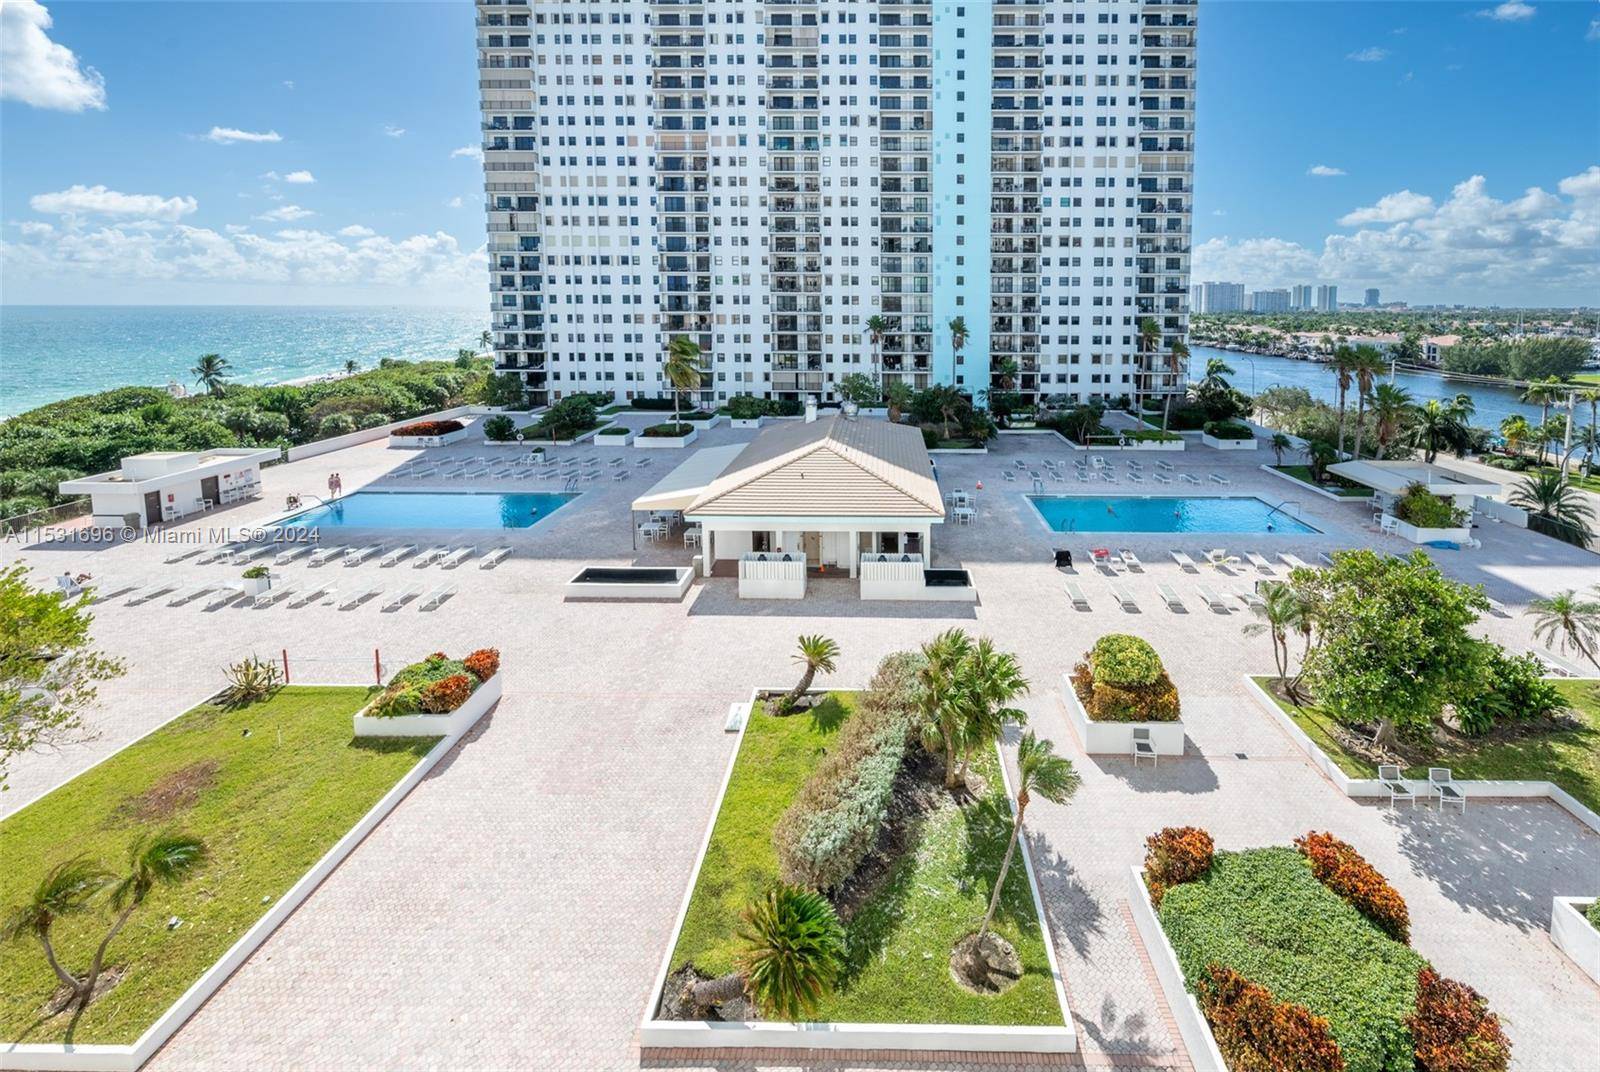 CAPTIVATING POOL AND OCEAN VIEWS FROM THIS 2 BEDROOM 2 BATHROOM BEACHFRONT CONDO.